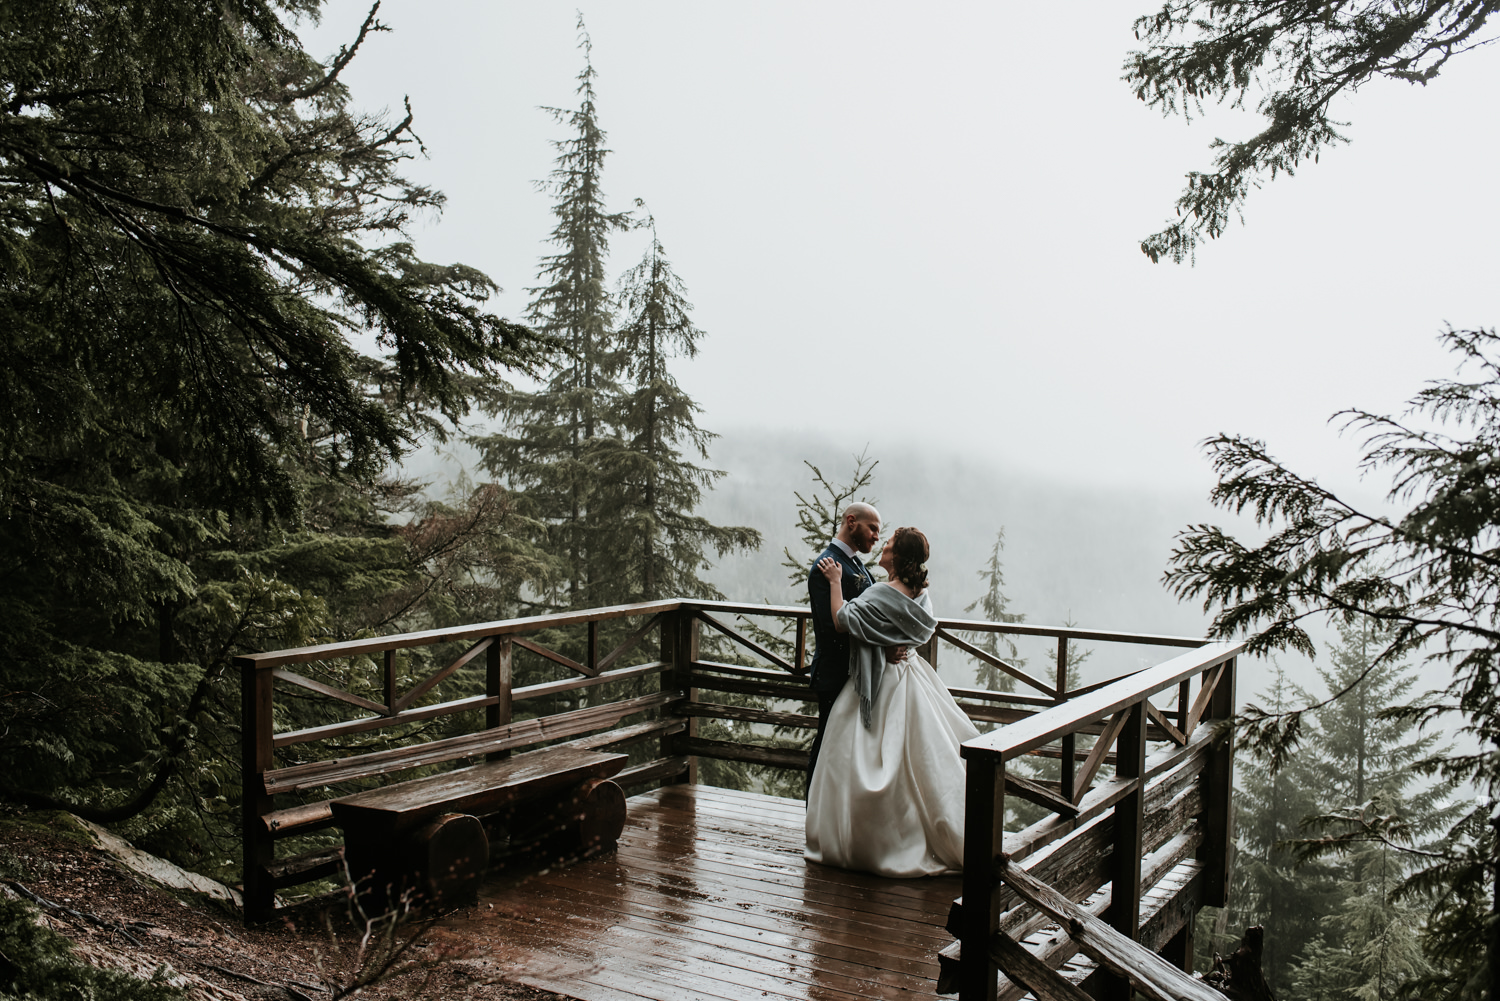 A Whistler forest wedding photographing the bride and groom